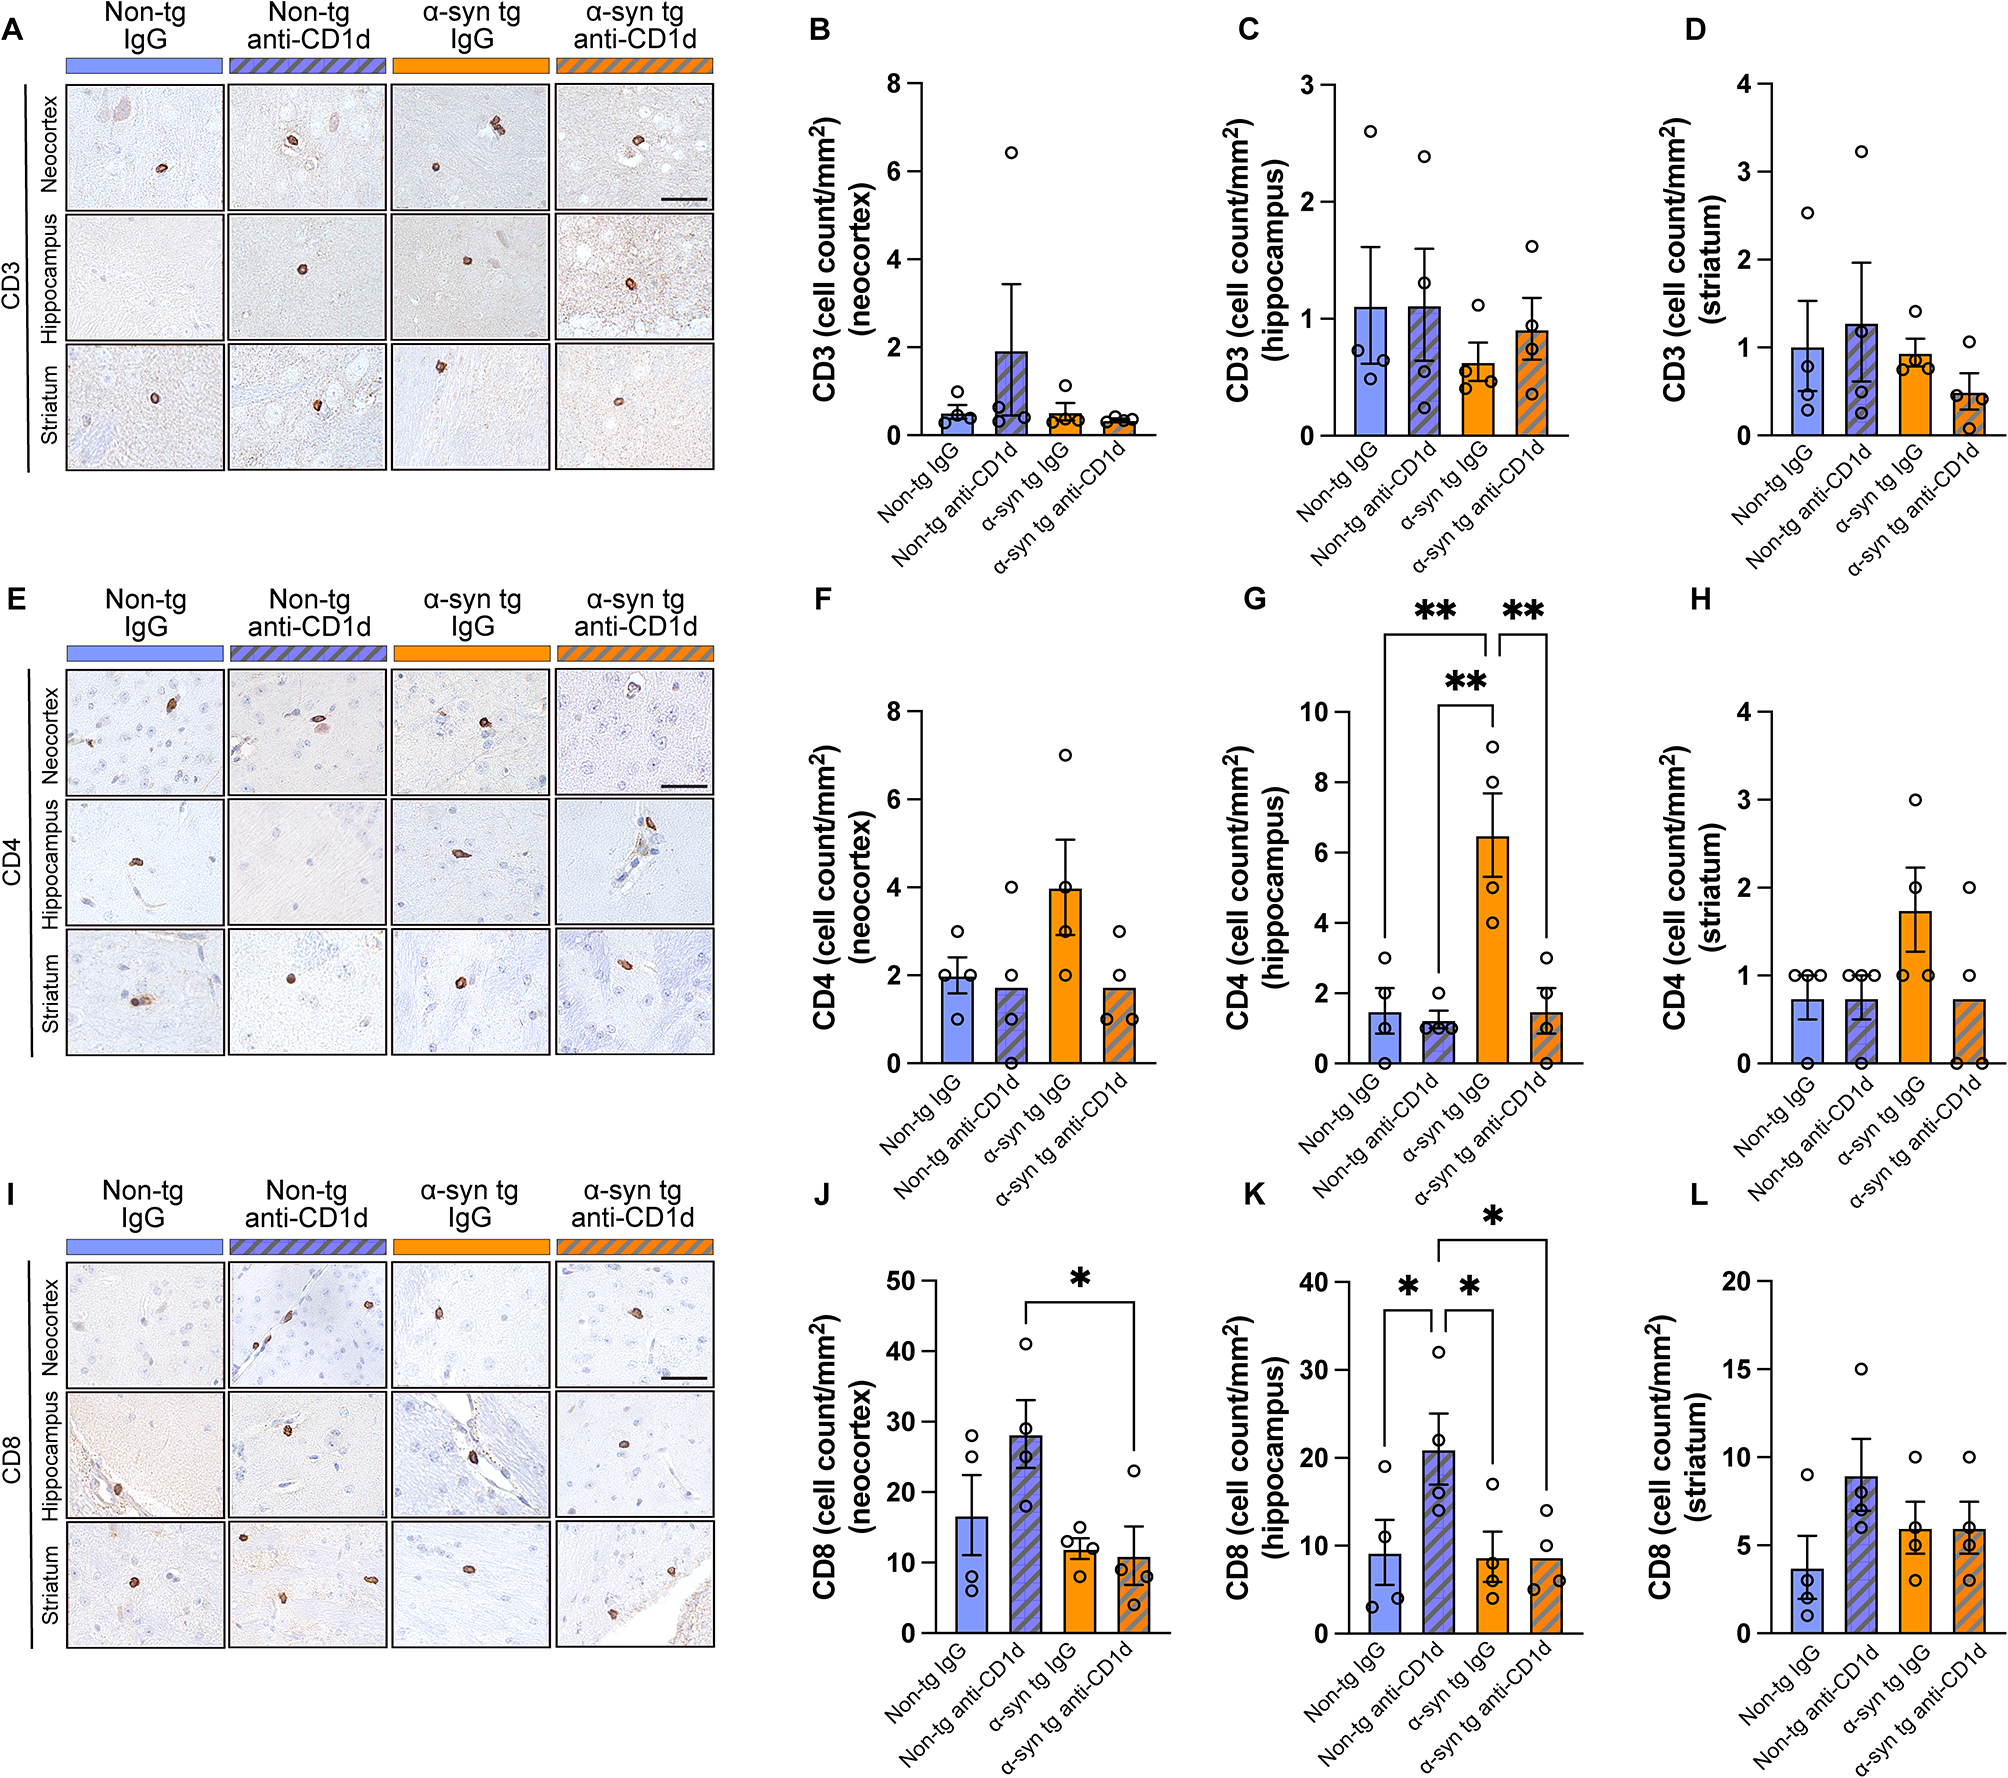 Immunotherapy with an antibody against CD1d modulates neuroinflammation in an α-synuclein transgenic model of Lewy body like disease